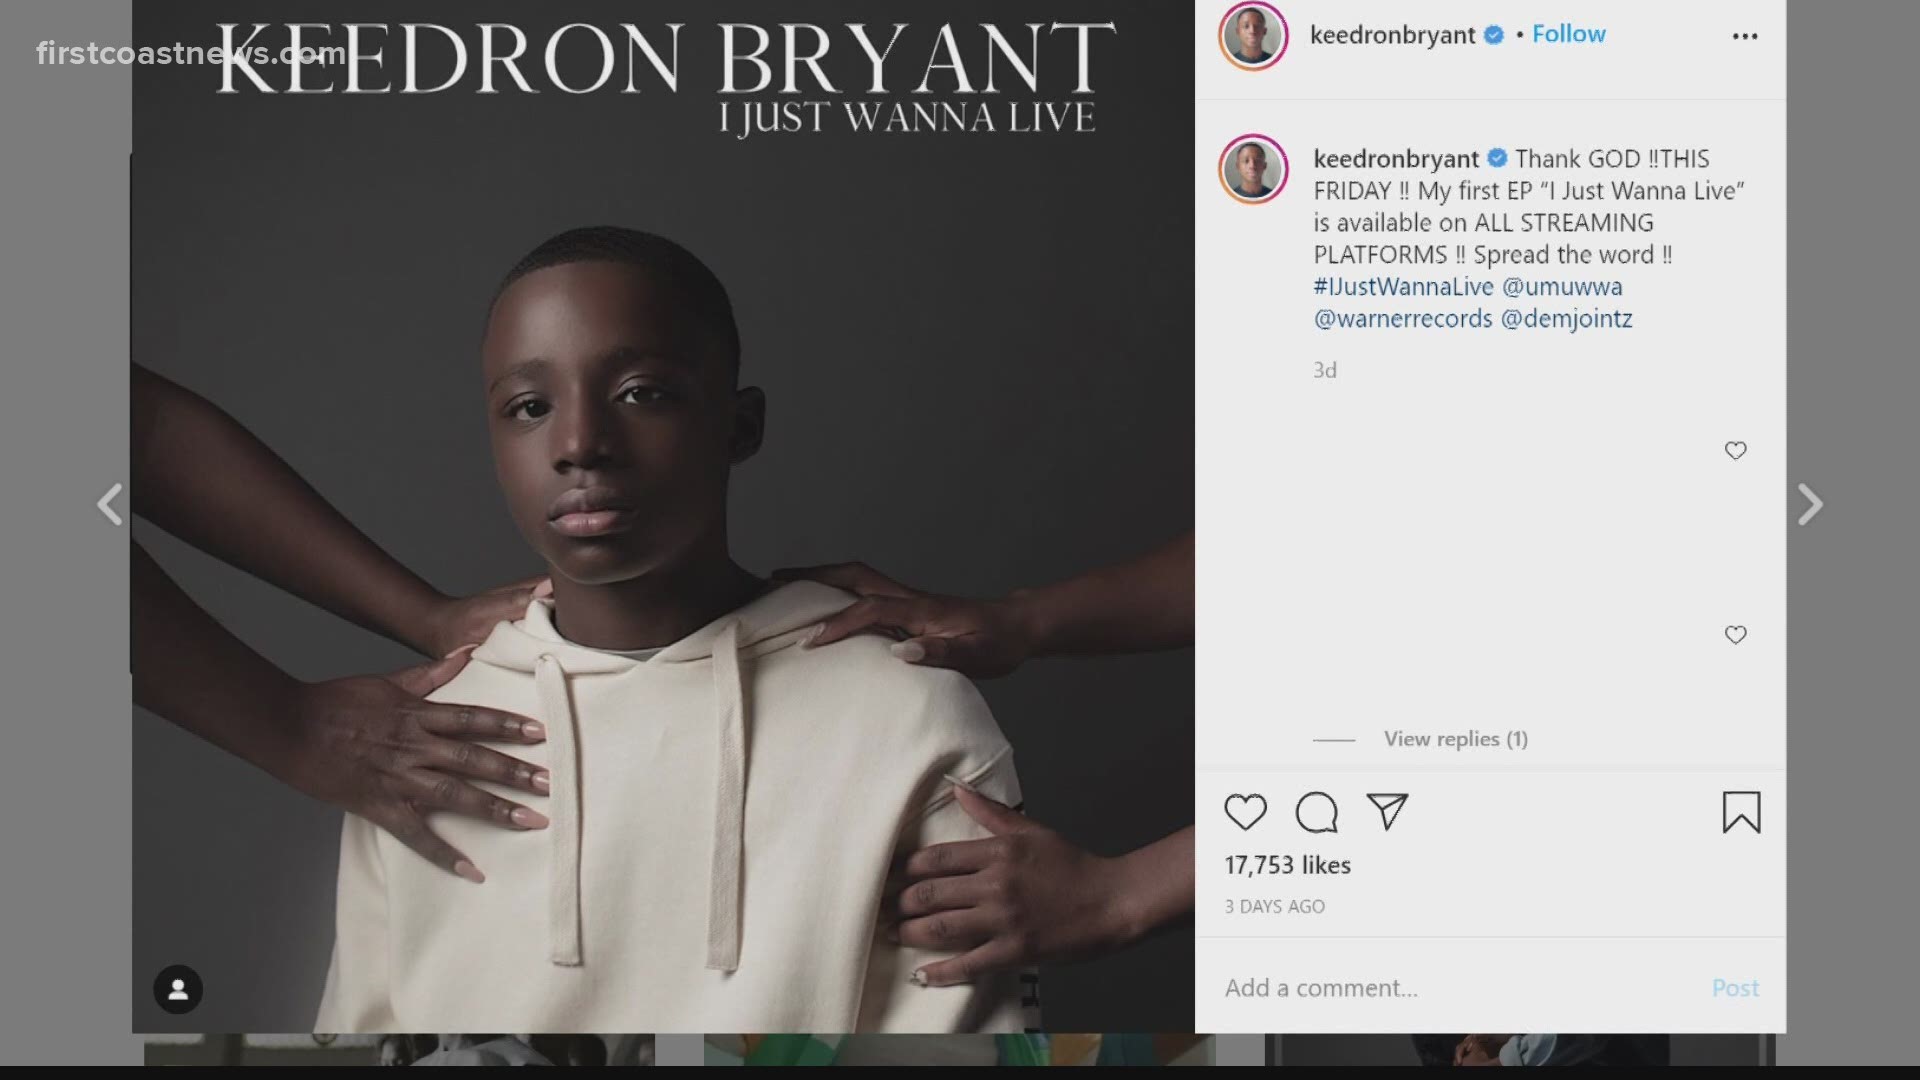 Oakleaf's 13-year-old Keedron Bryant is in the national spotlight again performing his viral song "I Just Wanna Live."